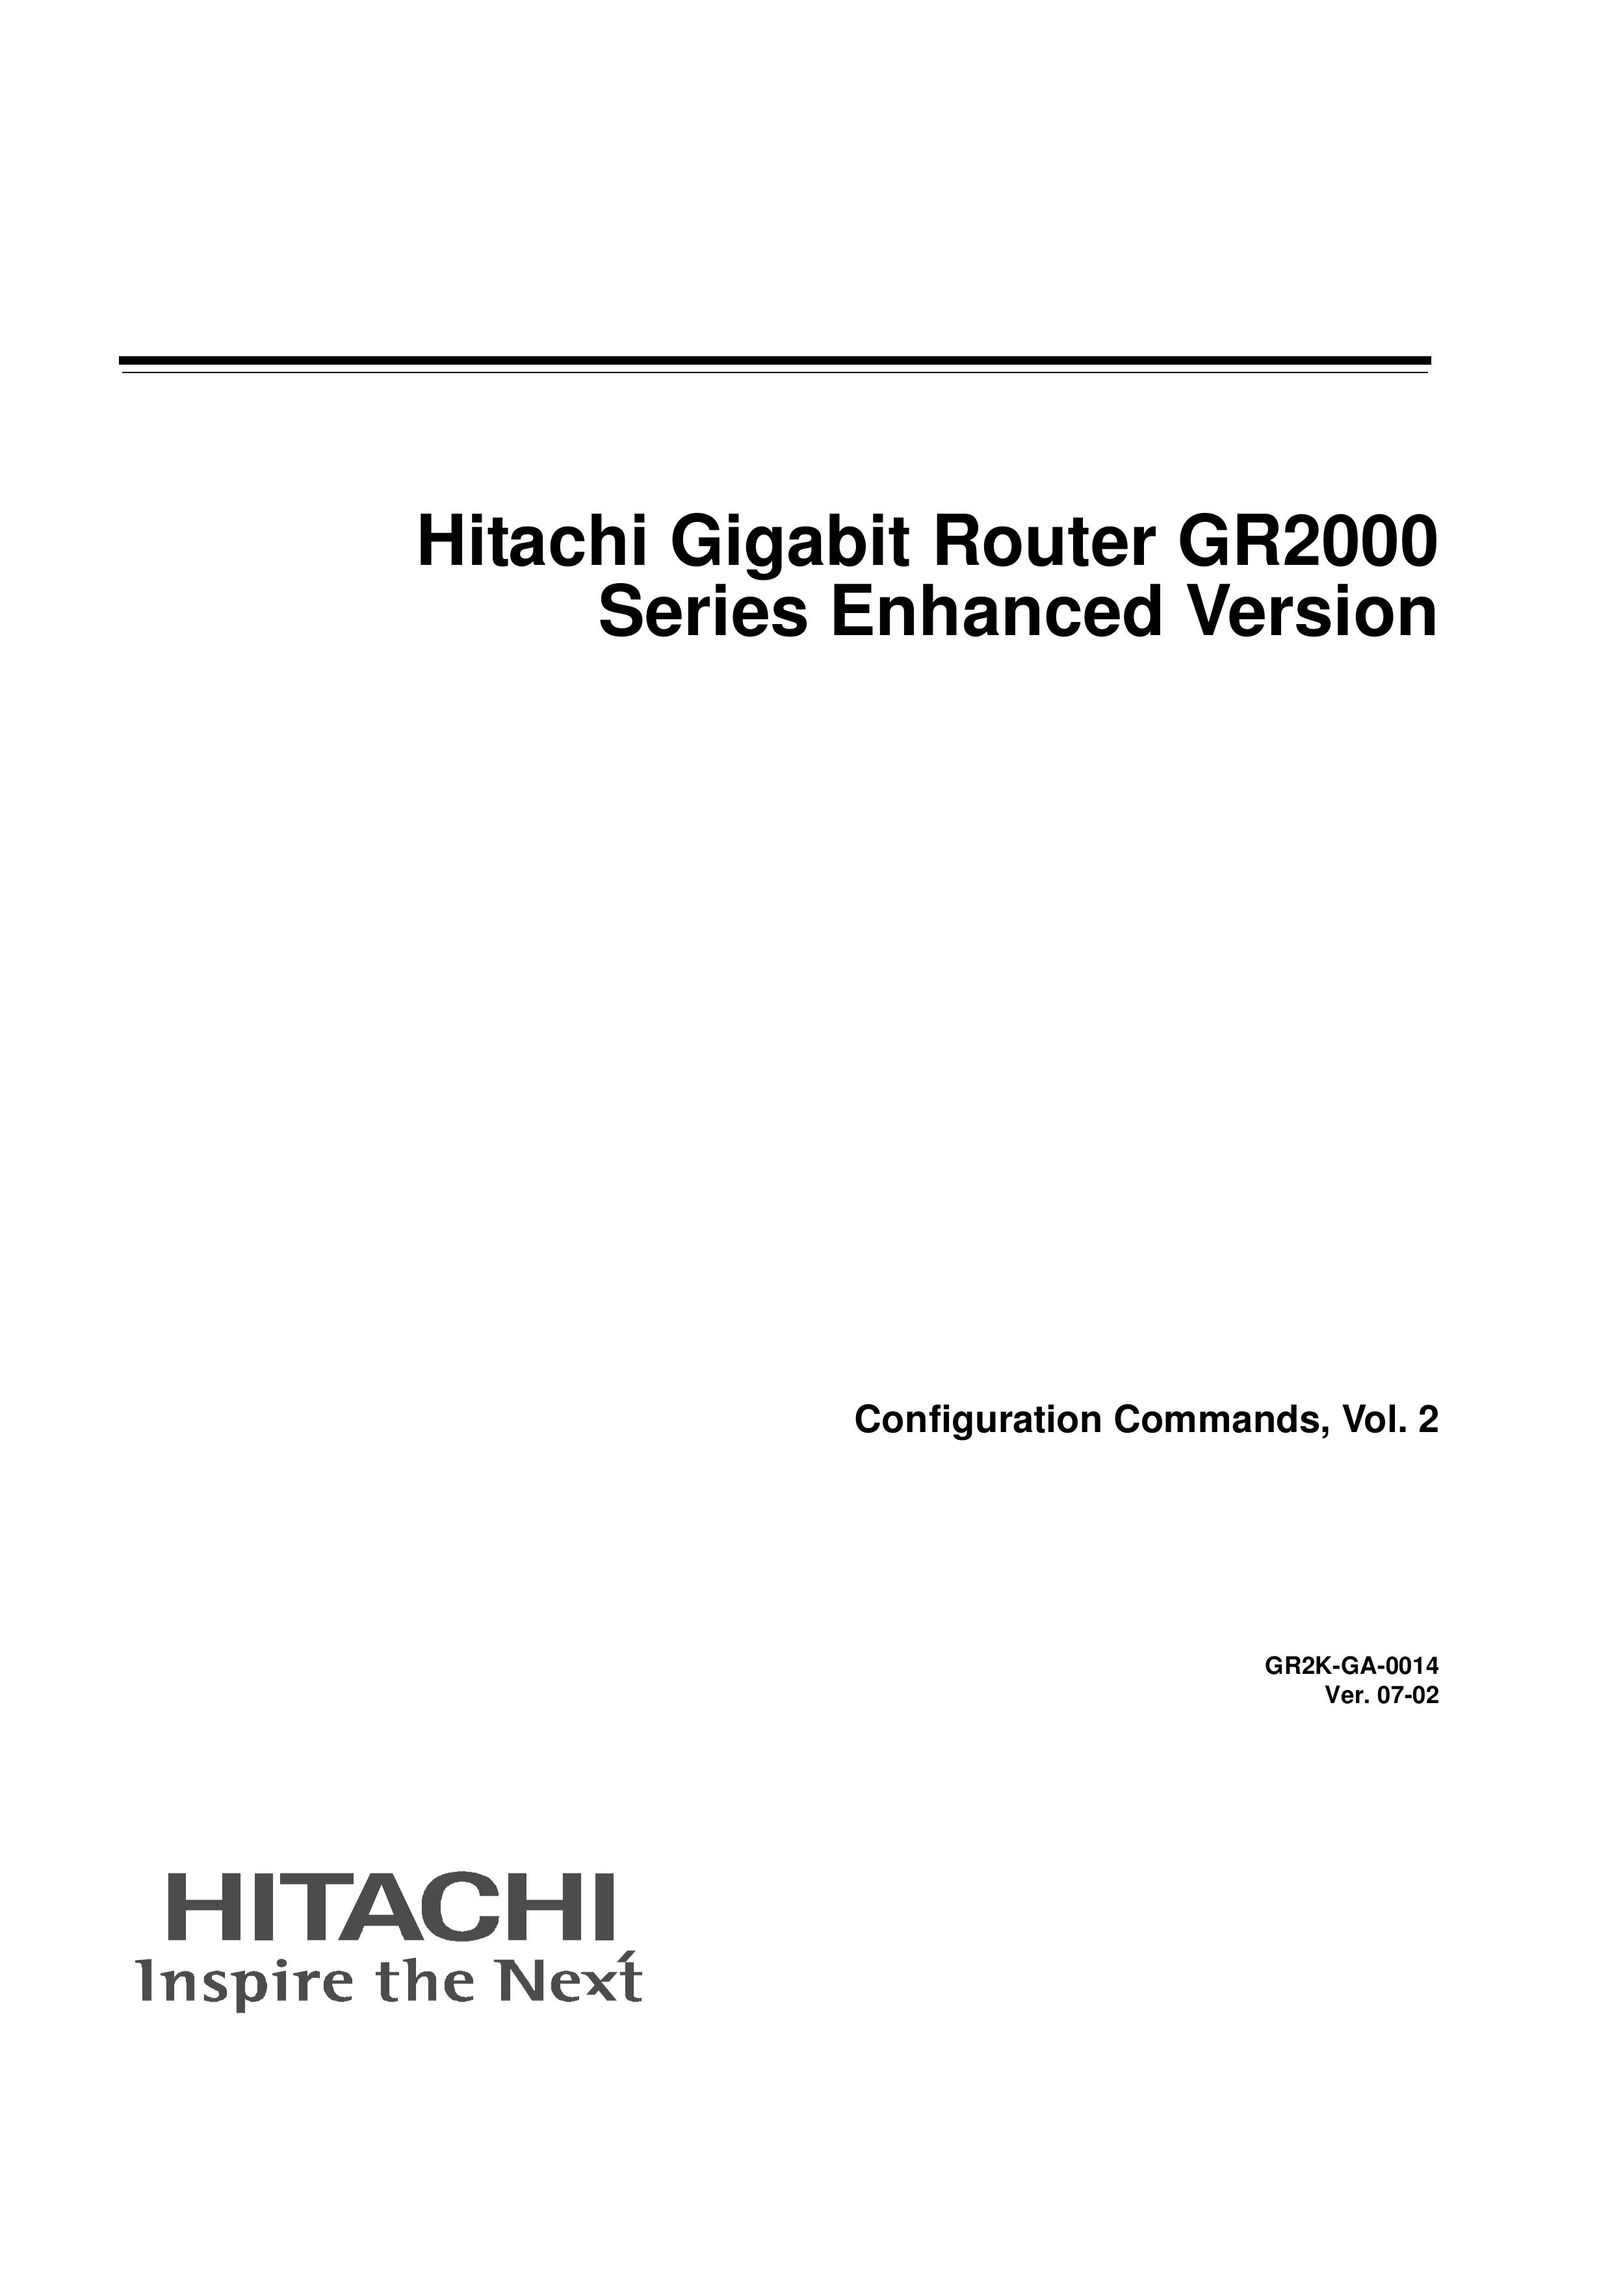 Hitachi GR2000 Series Network Router User Manual